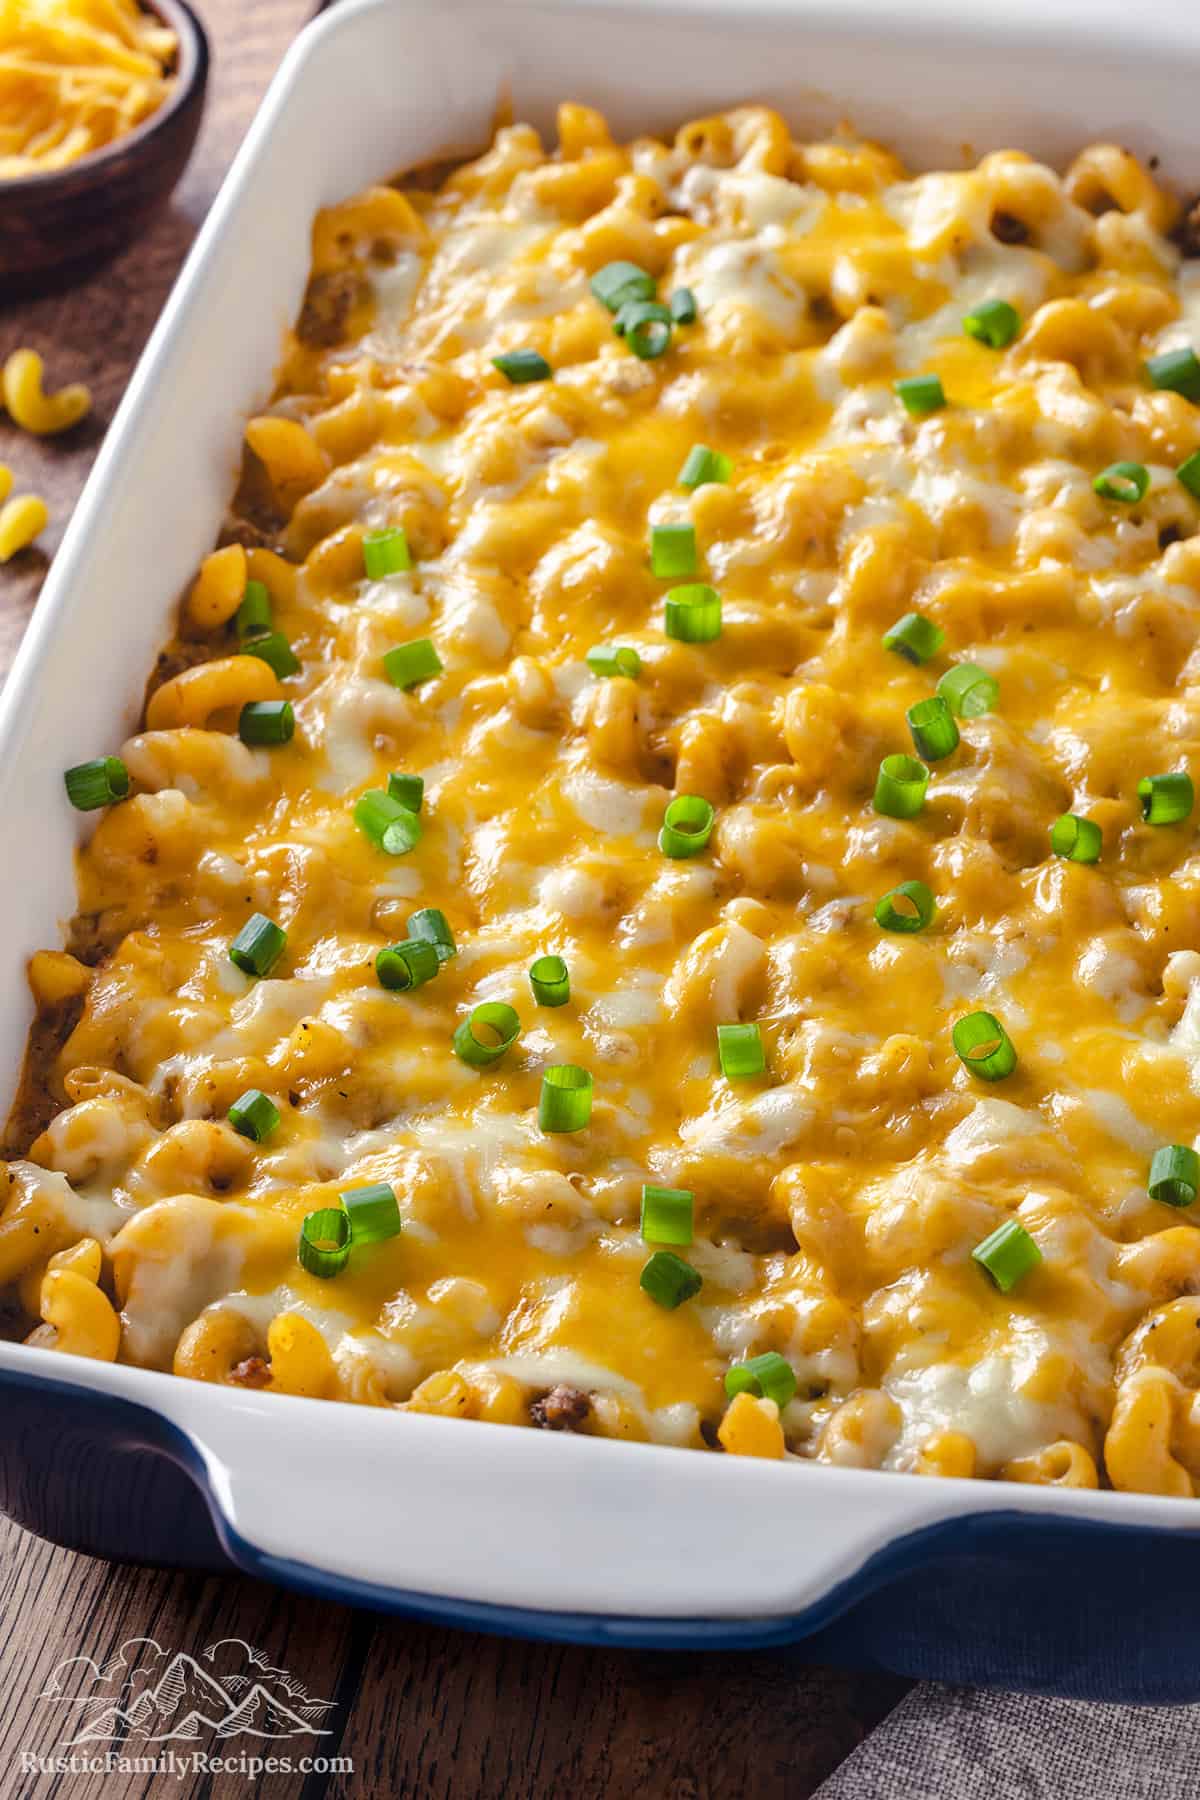 Cheeseburger casserole in a baking dish topped with melted cheese and sliced green onions.